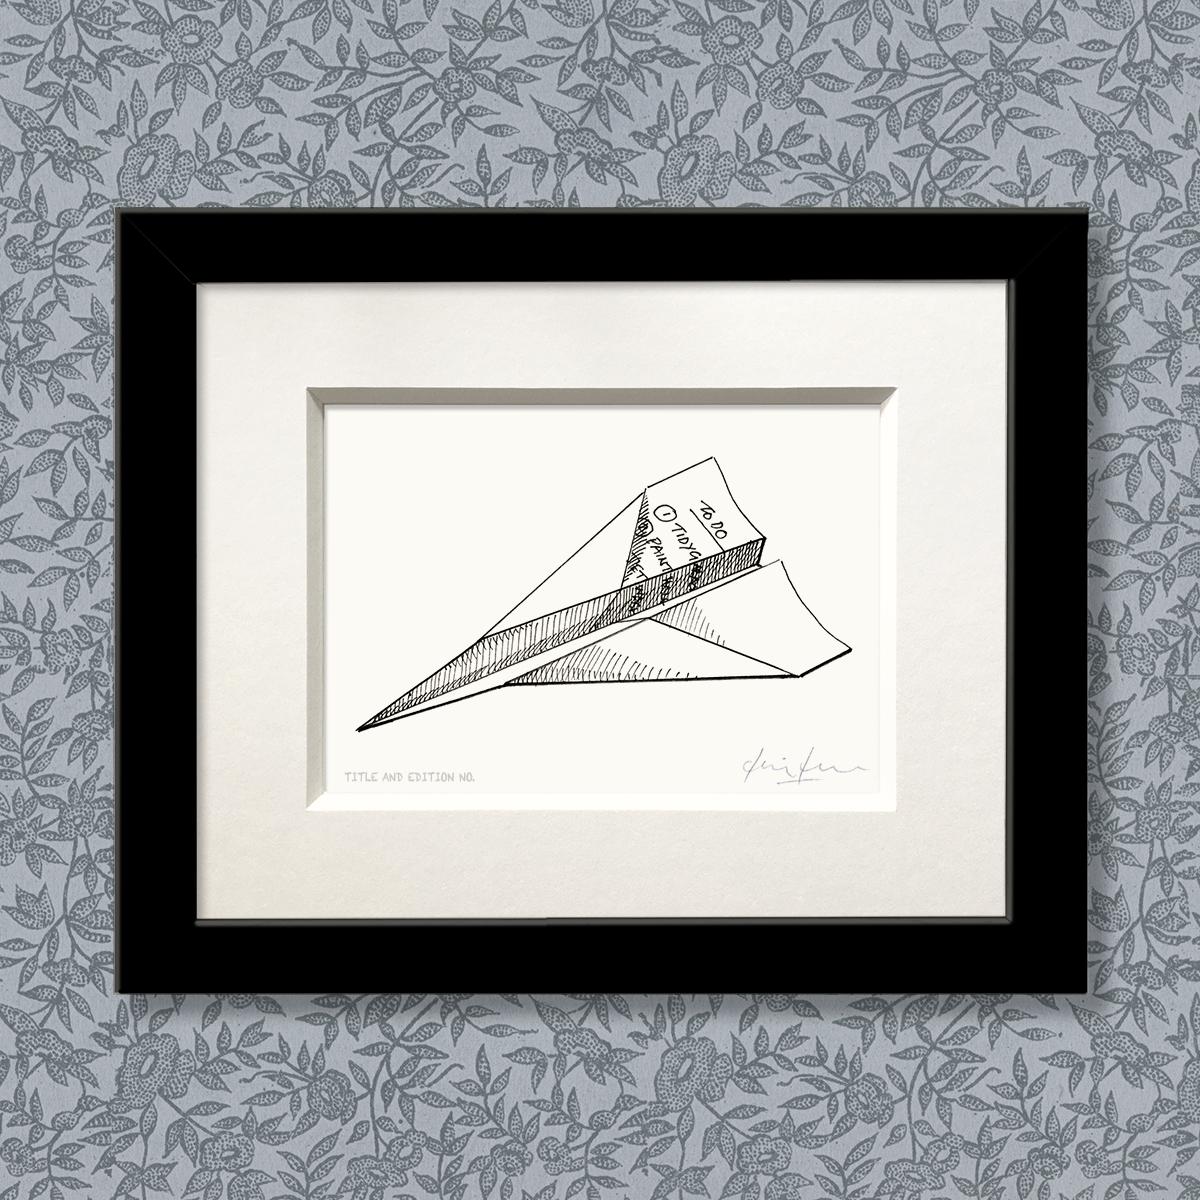 Limited edition print from a pen and ink drawing of a to-do list folded into a paper aeroplane in a black frame